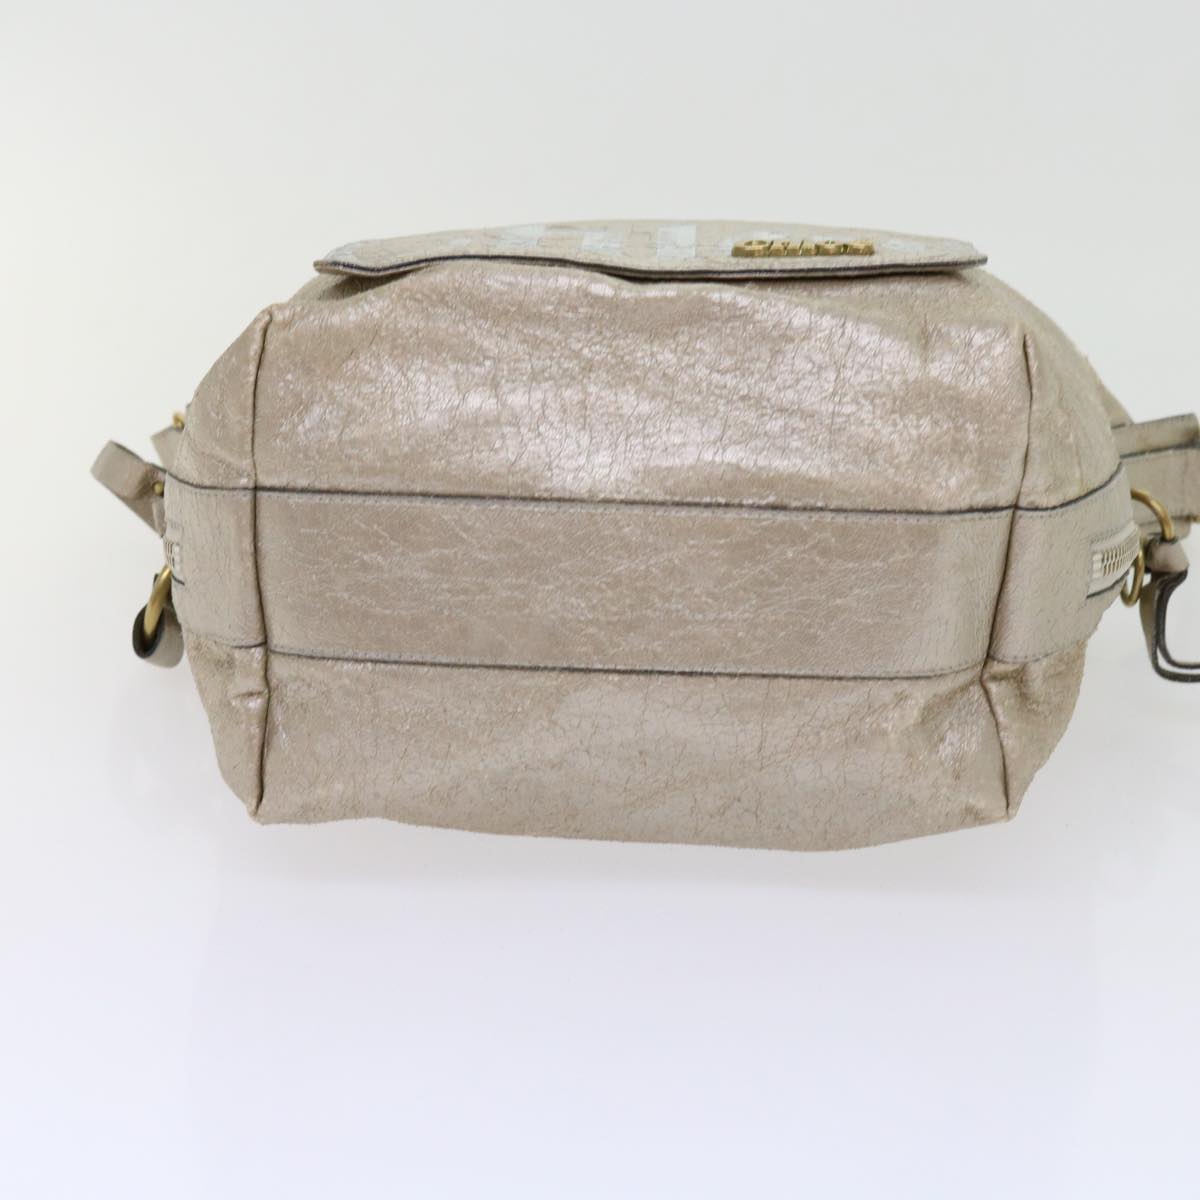 Chloe Shoulder Bag Leather Silver 02-09-51-5859 Auth bs10804